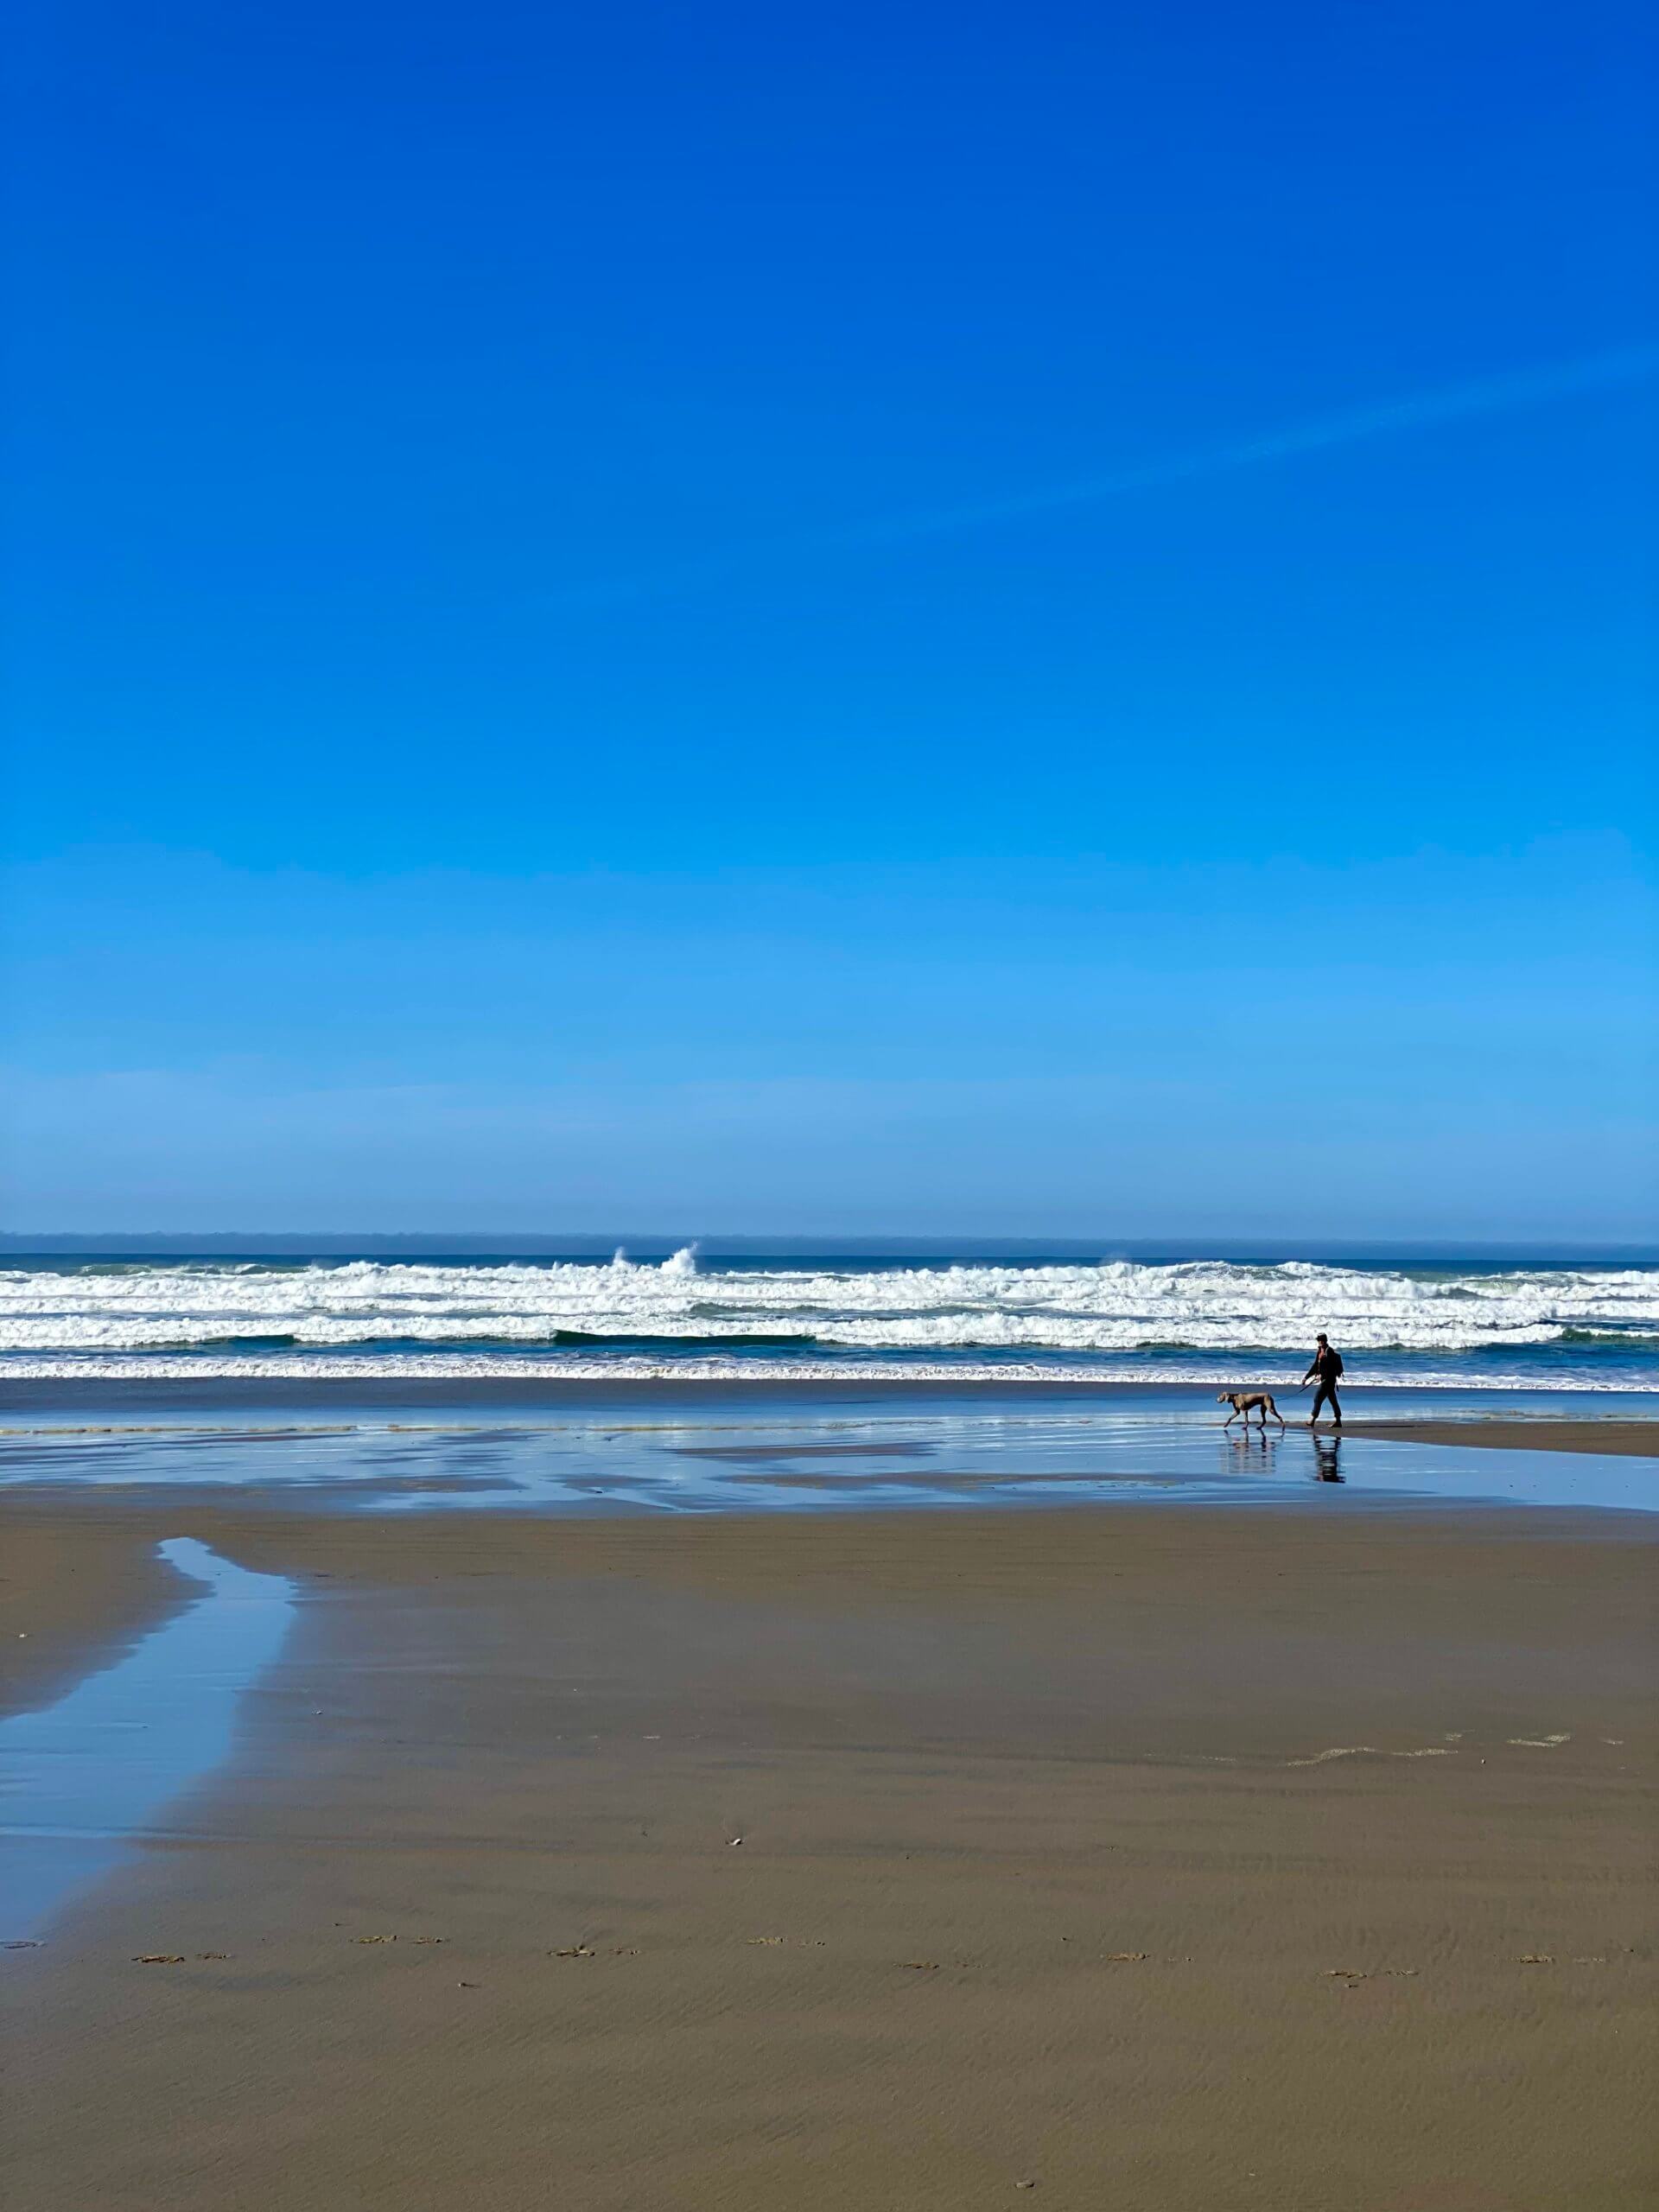 A crystal clear blue sky day on the Oregon Coast. A person is walking their dog on the wide sandy beach.